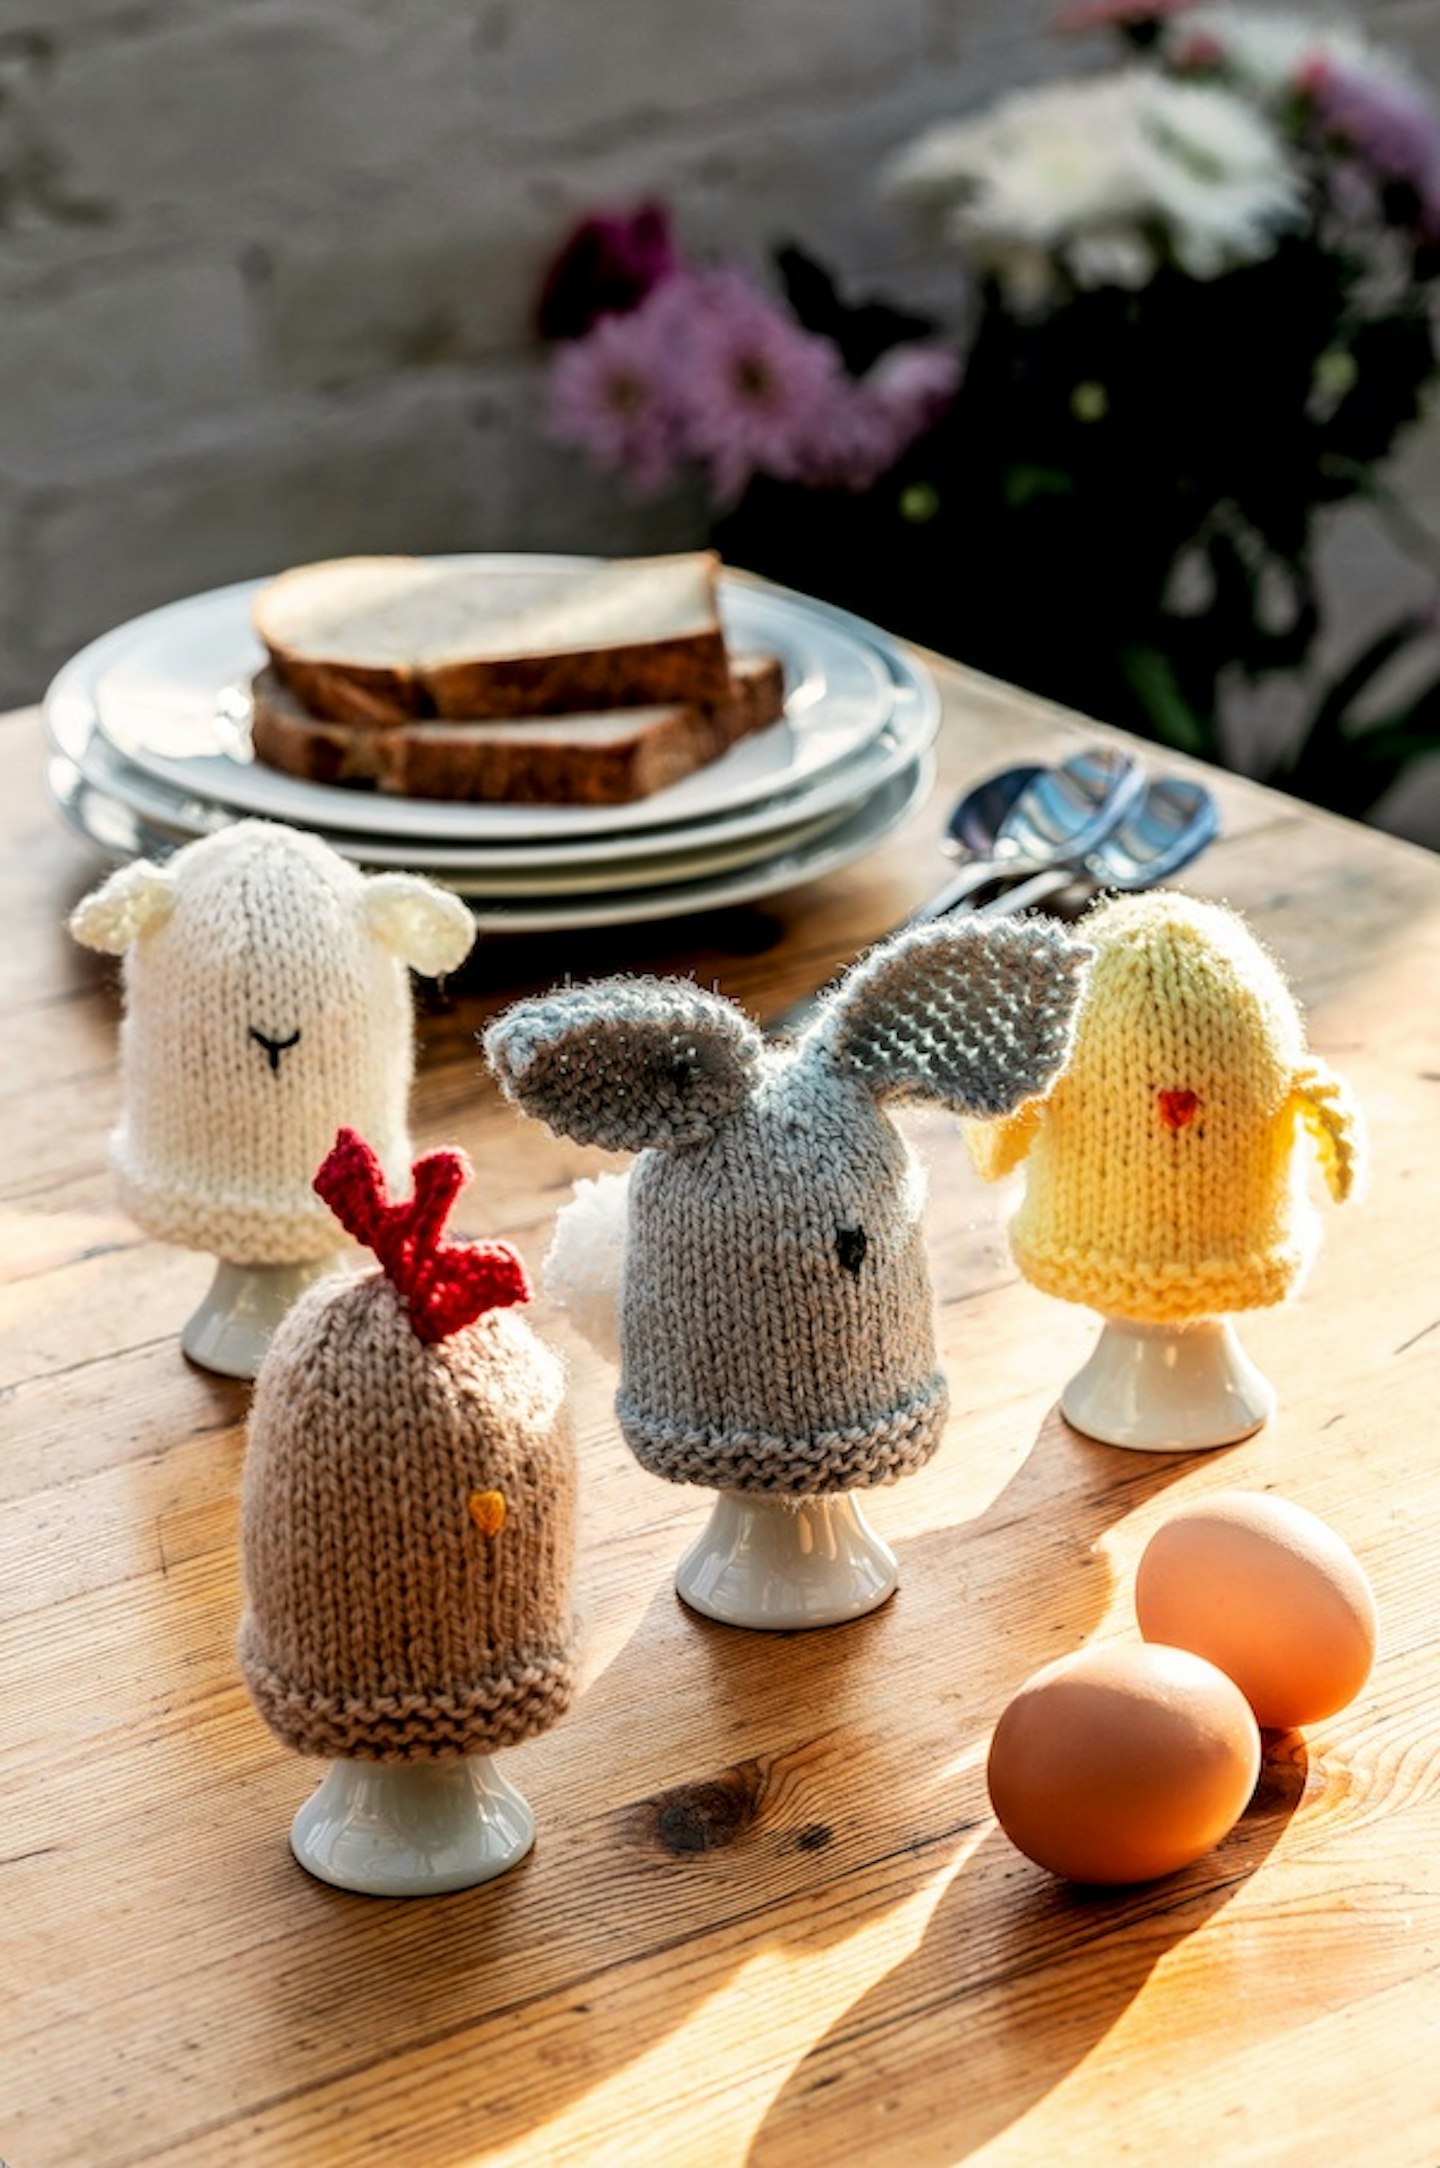 Easter Egg Cosies knitting pattern from LandScape magazine